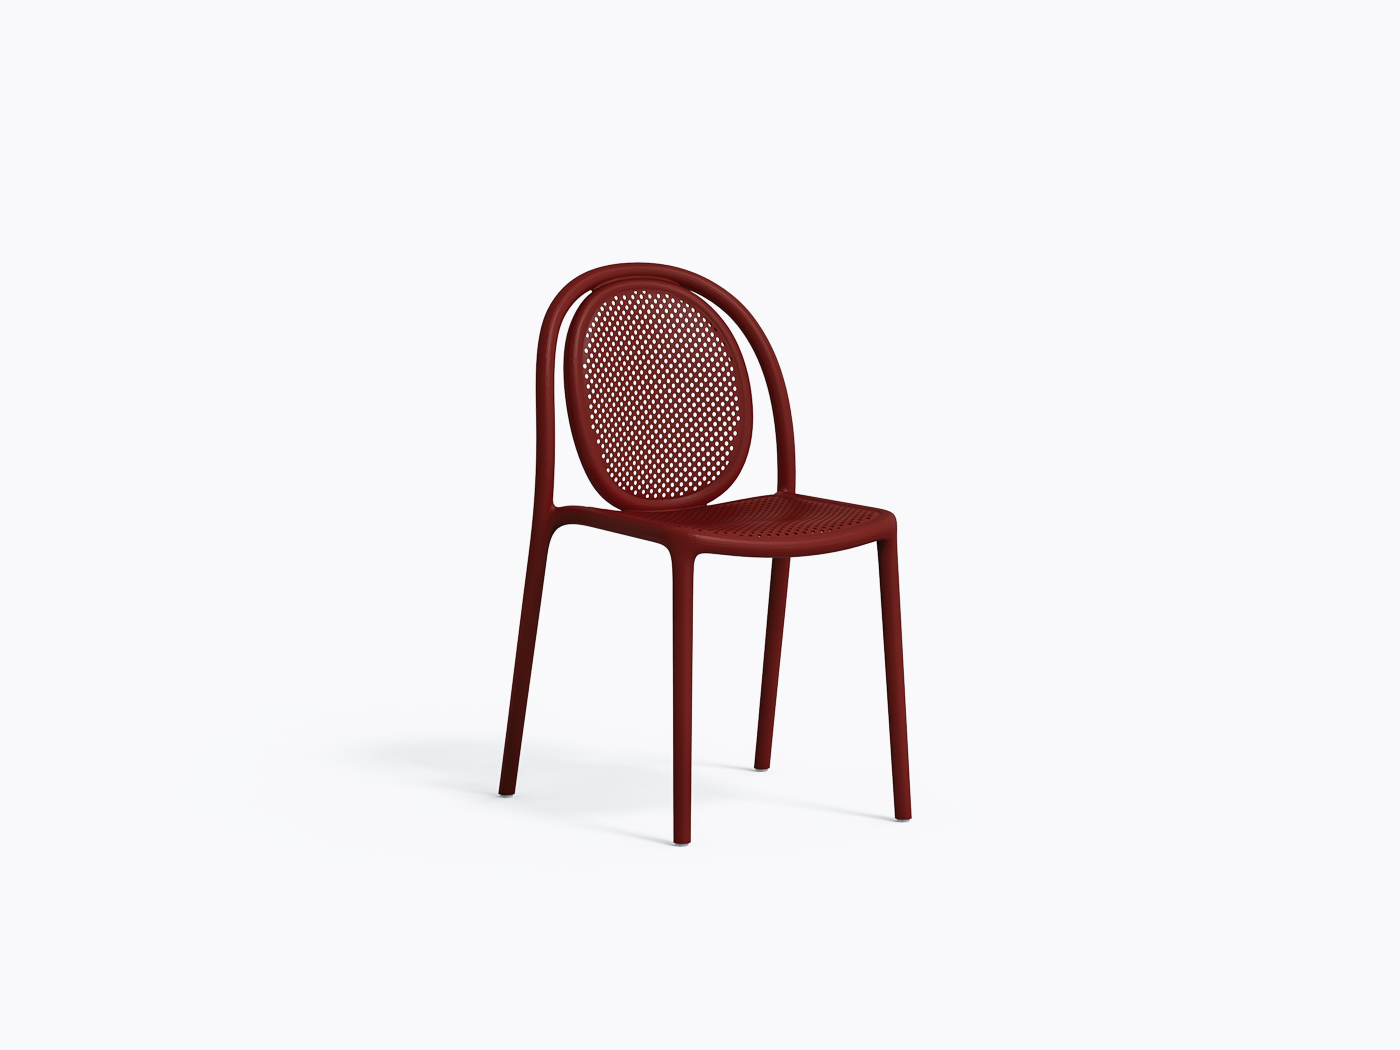 Remind 3730 Chair - Red RO